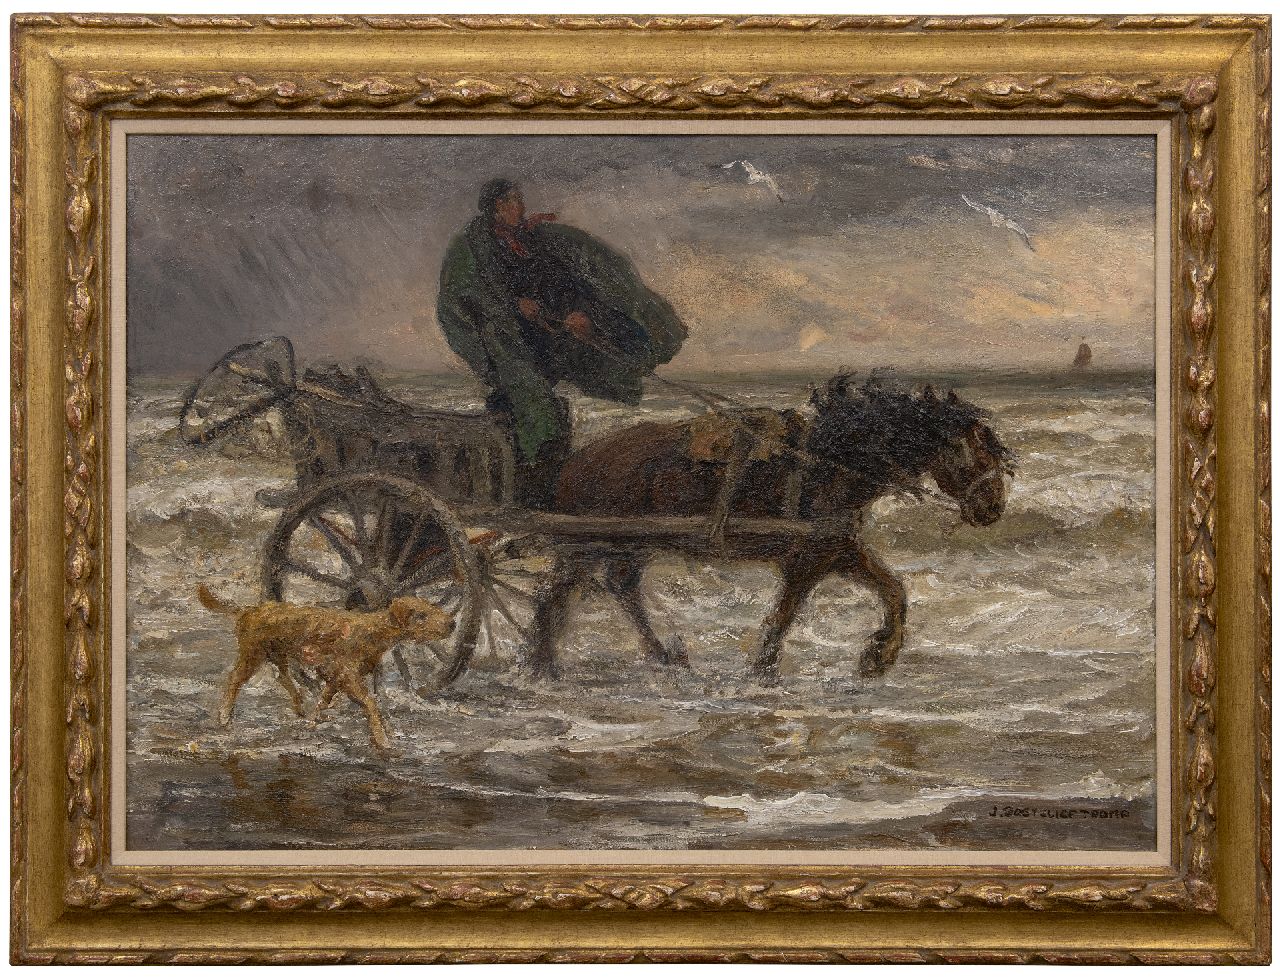 Zoetelief Tromp J.  | Johannes 'Jan' Zoetelief Tromp | Paintings offered for sale | Shell fisherman riding his cart, oil on canvas 66.2 x 96.8 cm, signed l.r.